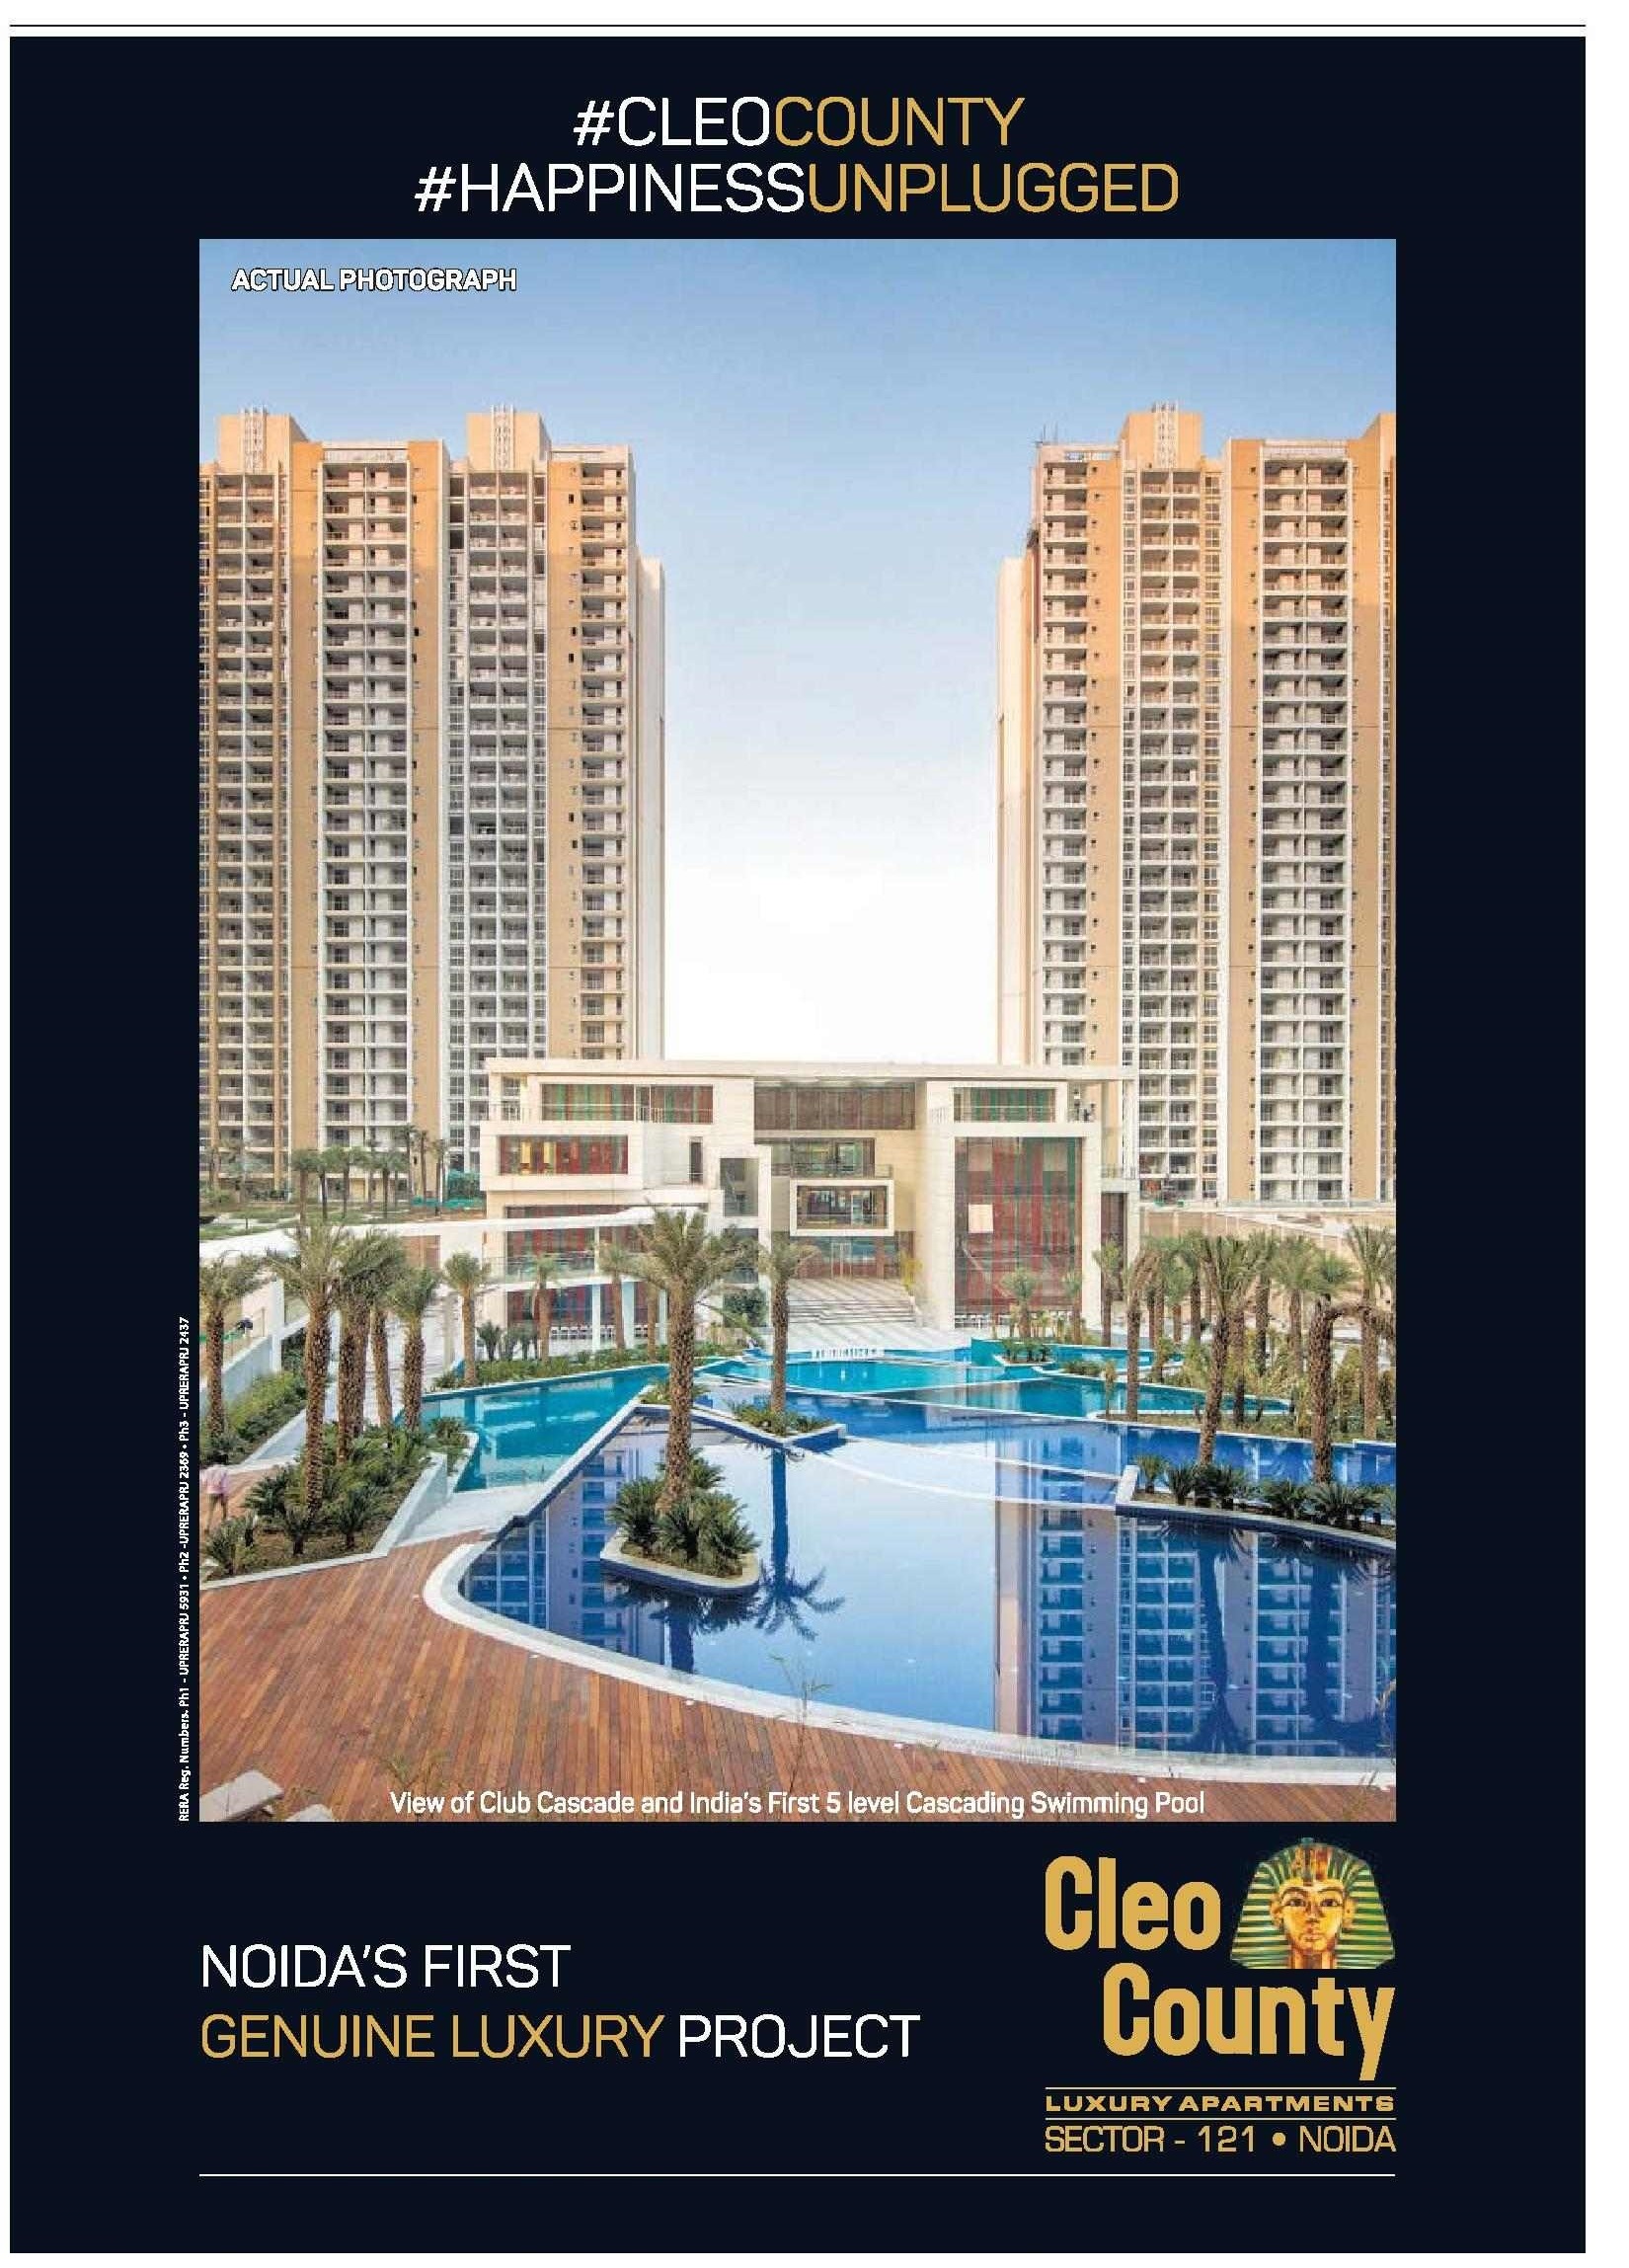 Book luxury apartments at ABA Cleo County in Noida